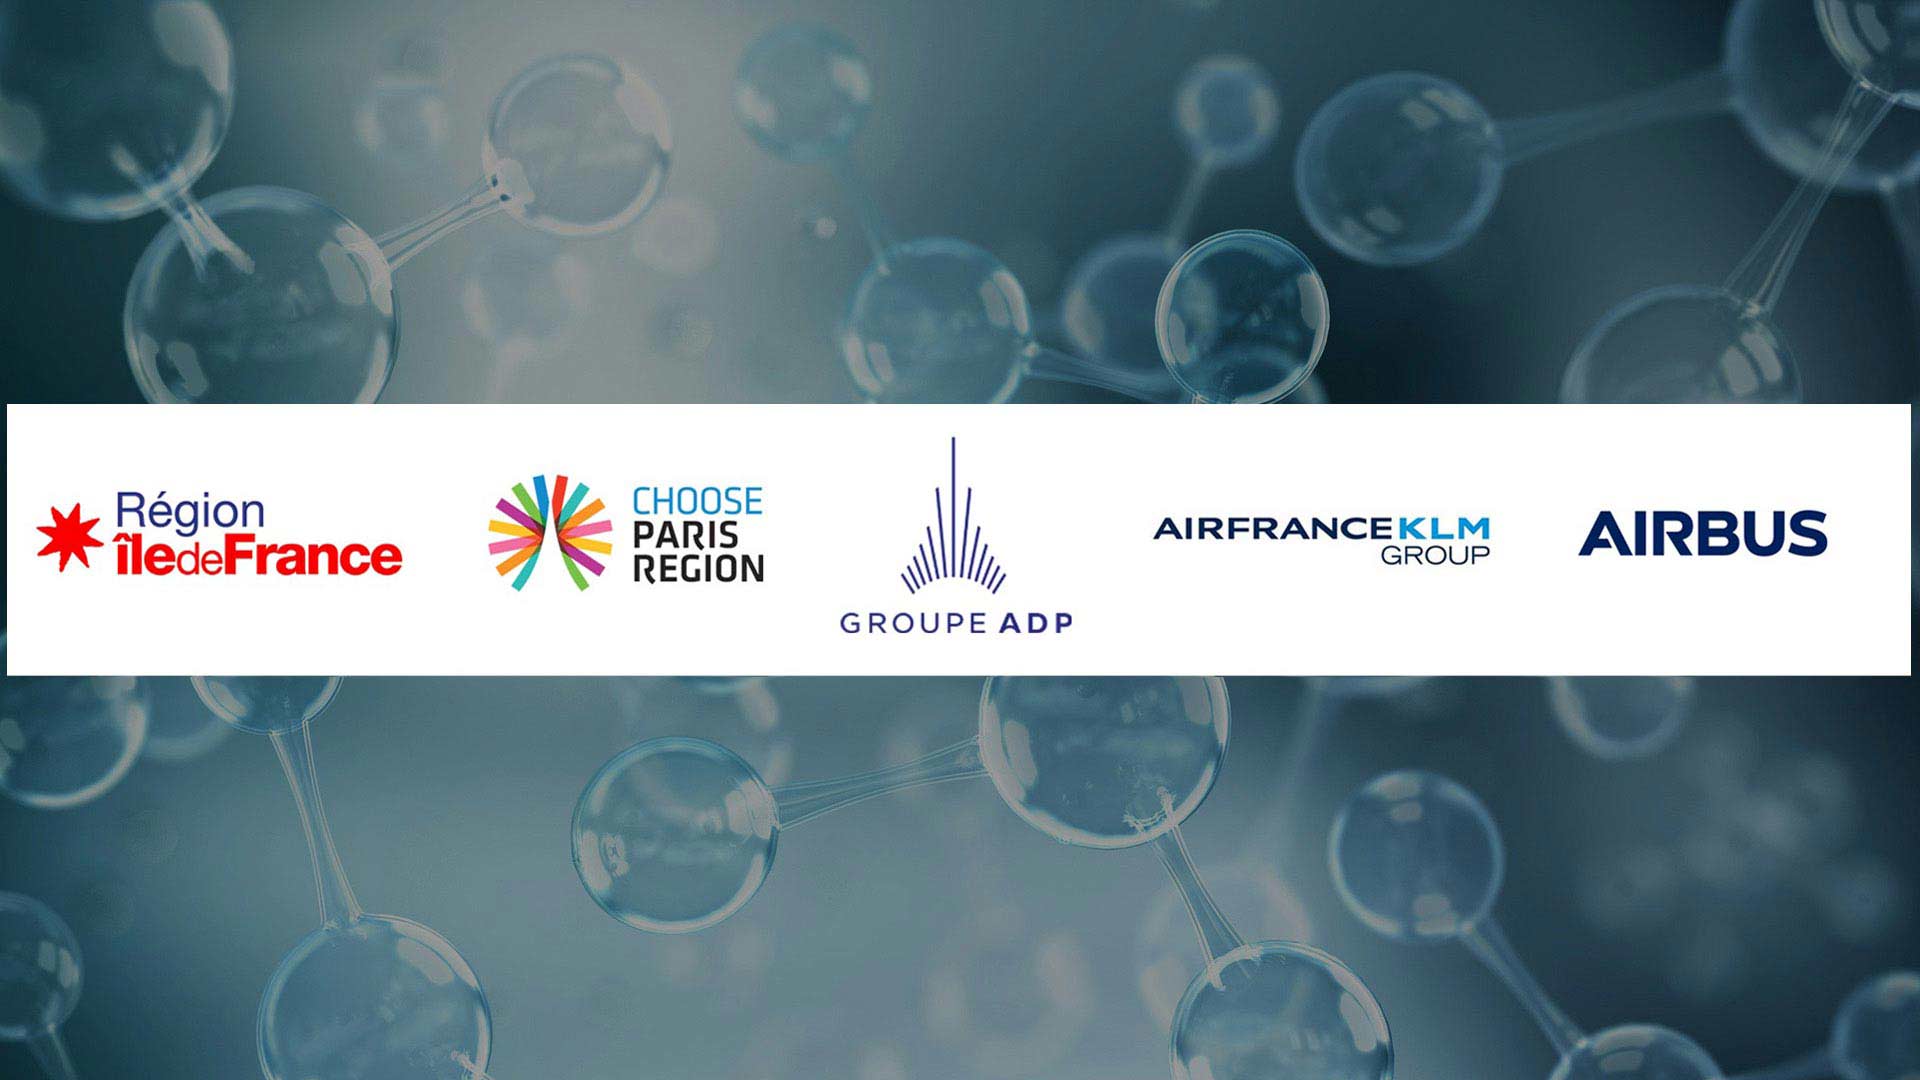 Paris Region, Choose Paris Region, Groupe ADP, Air France-KLM and Airbus  reveal the winners of the worldwide call for expressions of interest  regarding the setup of a Hydrogen branch in airports